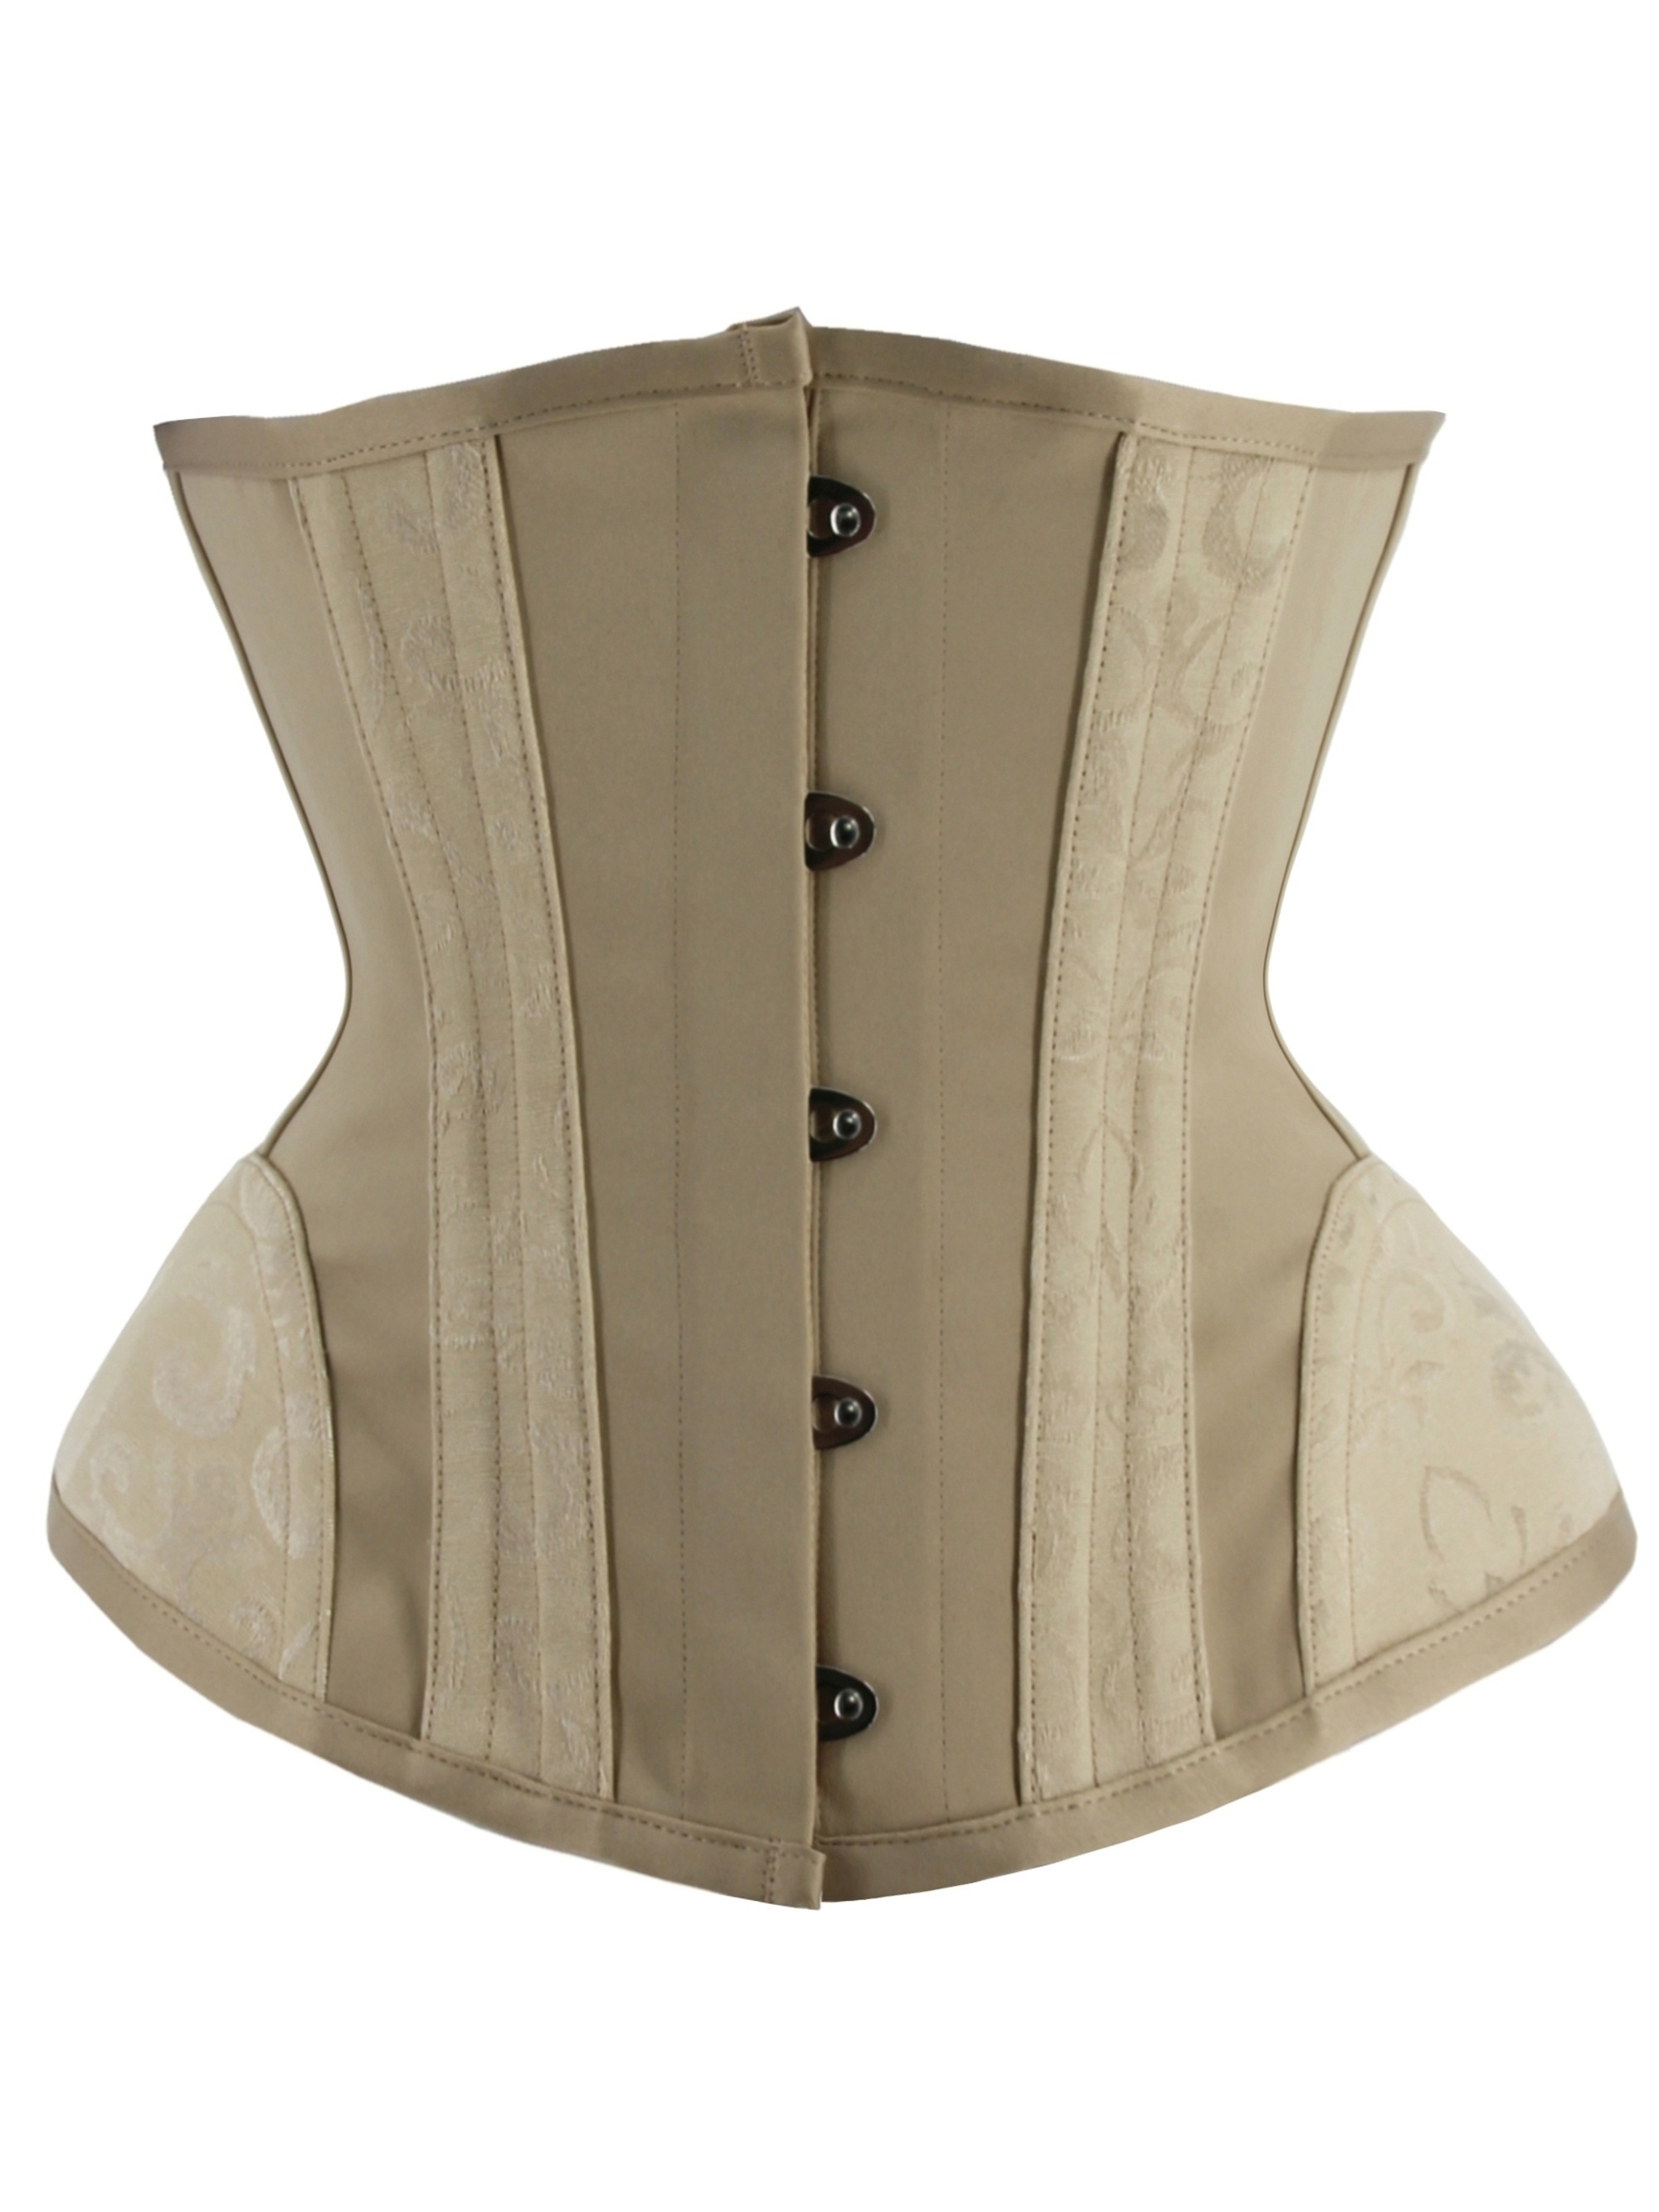 Strap Backless Push up Wing Corset Drawstring Tie Adjustable Beige